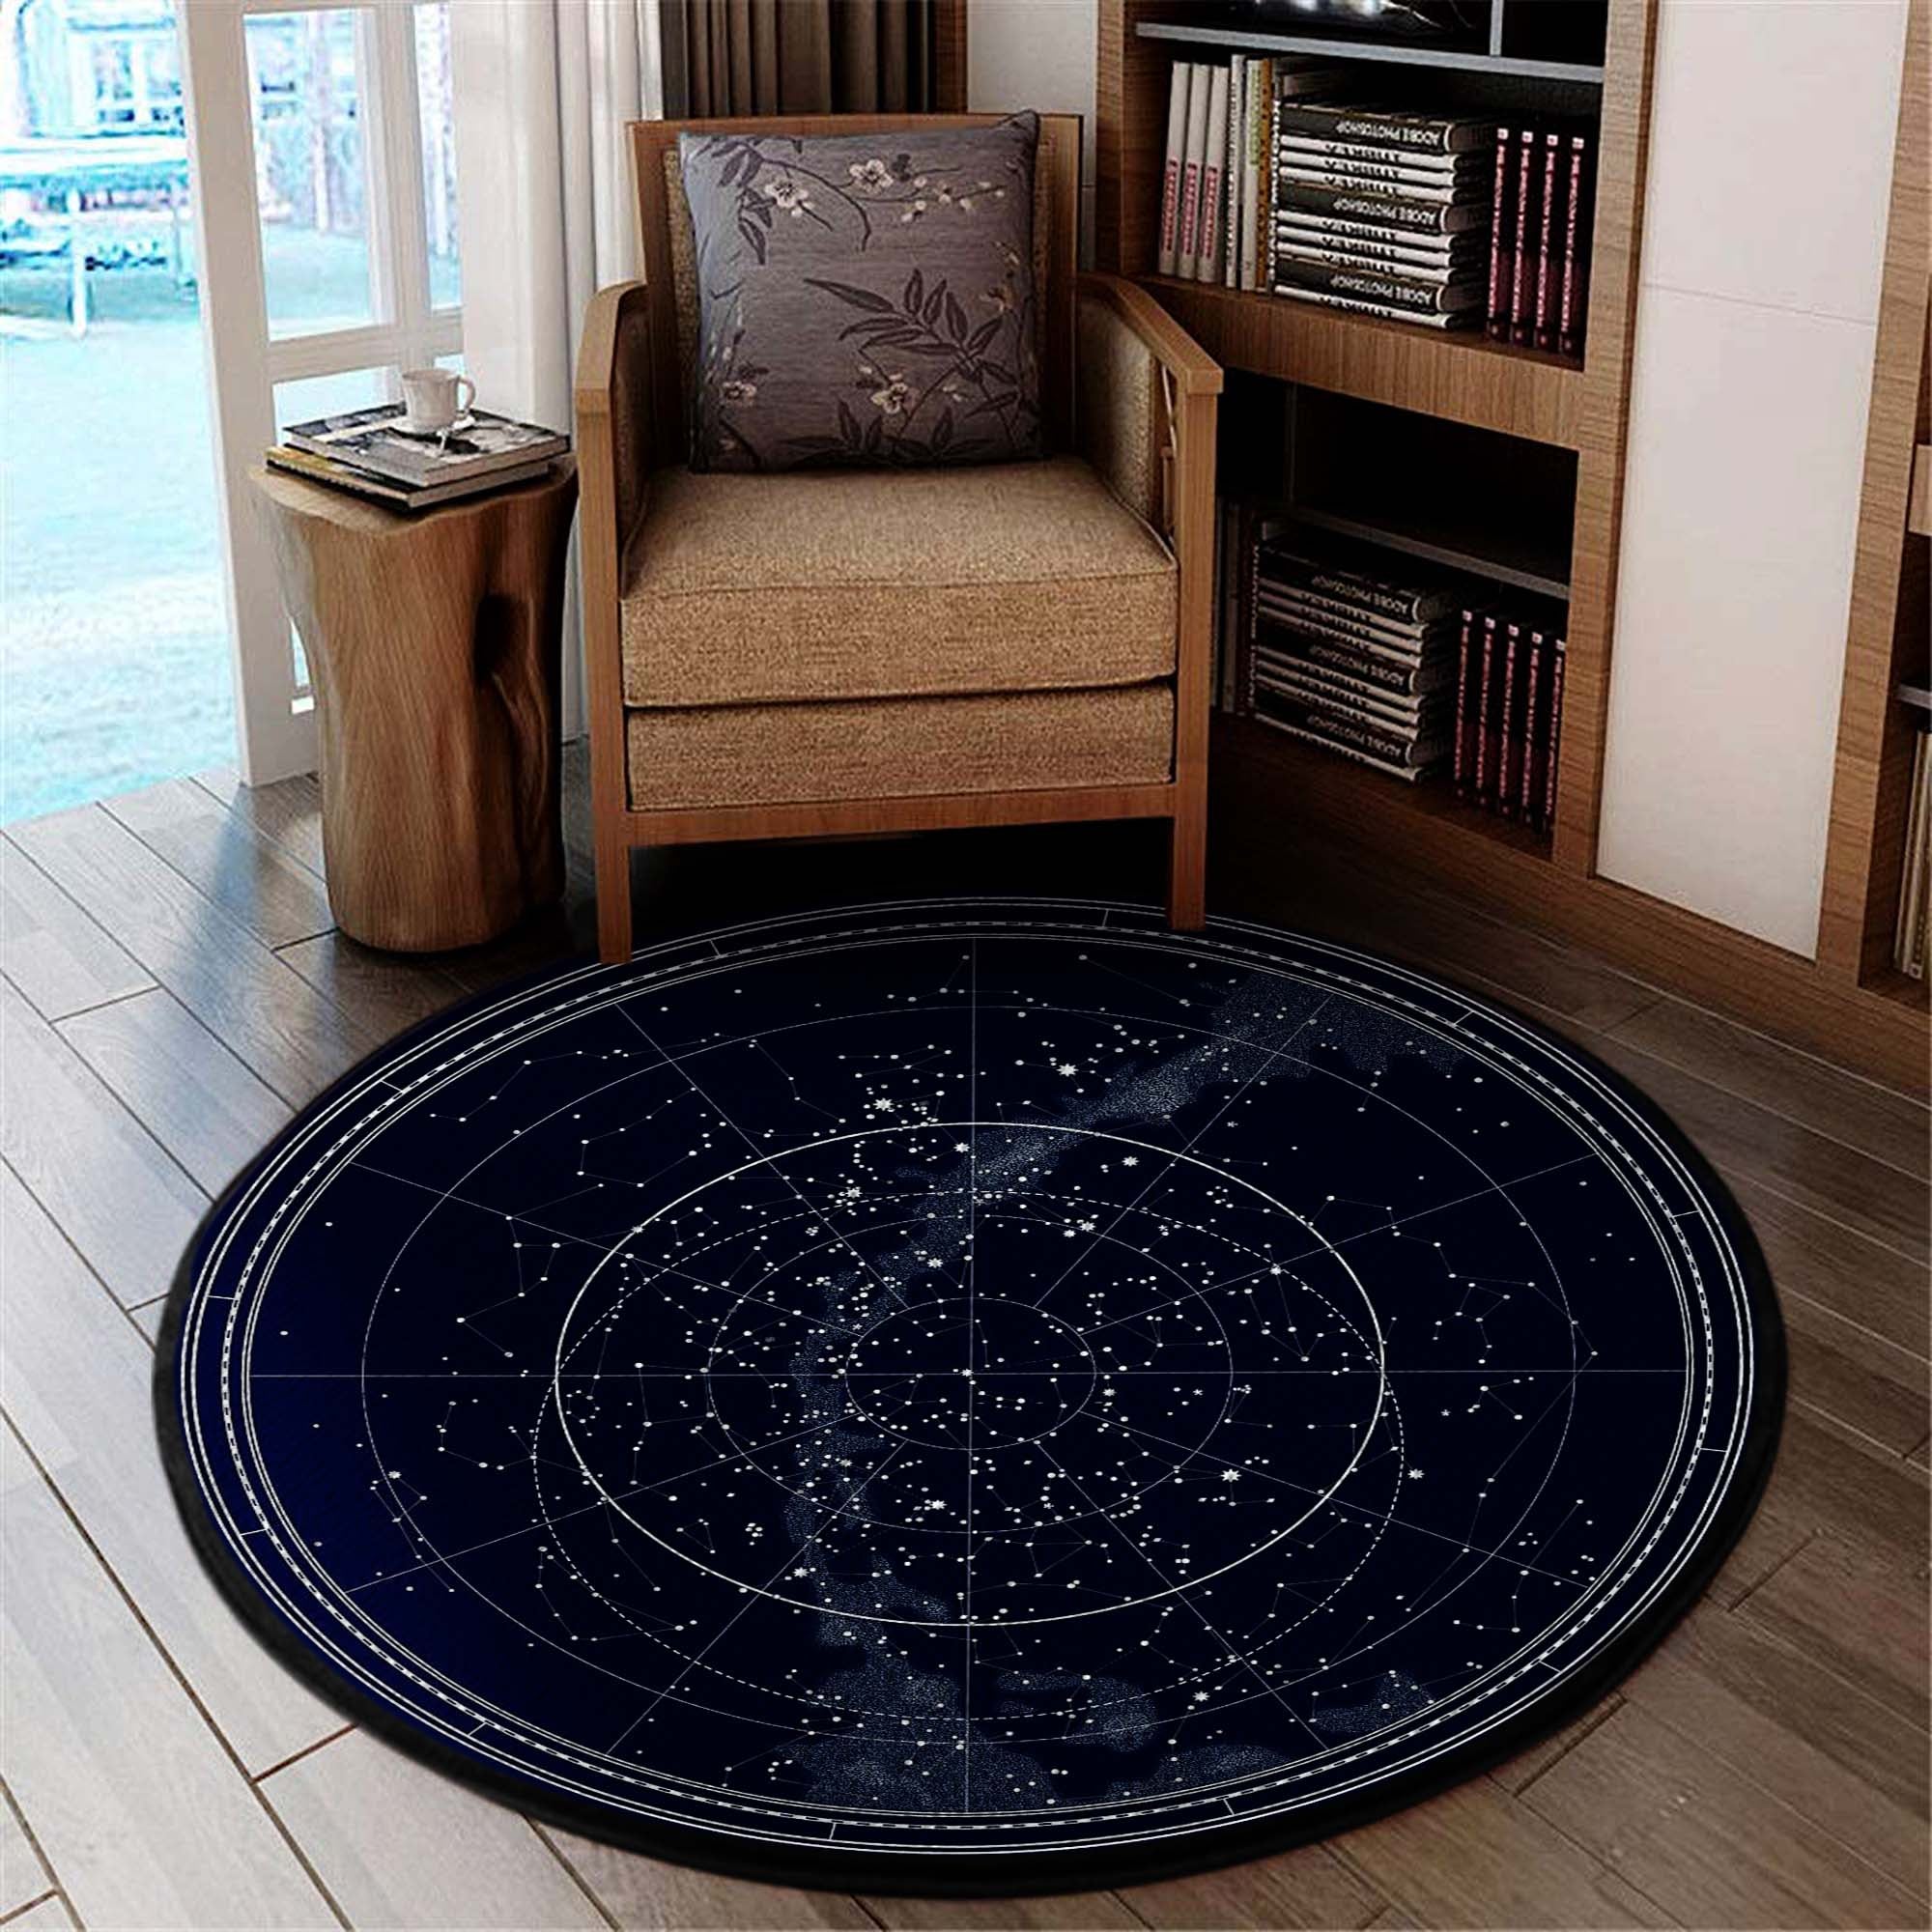 Astronomical Map of The Northern Hemisphere Round Mat 06326